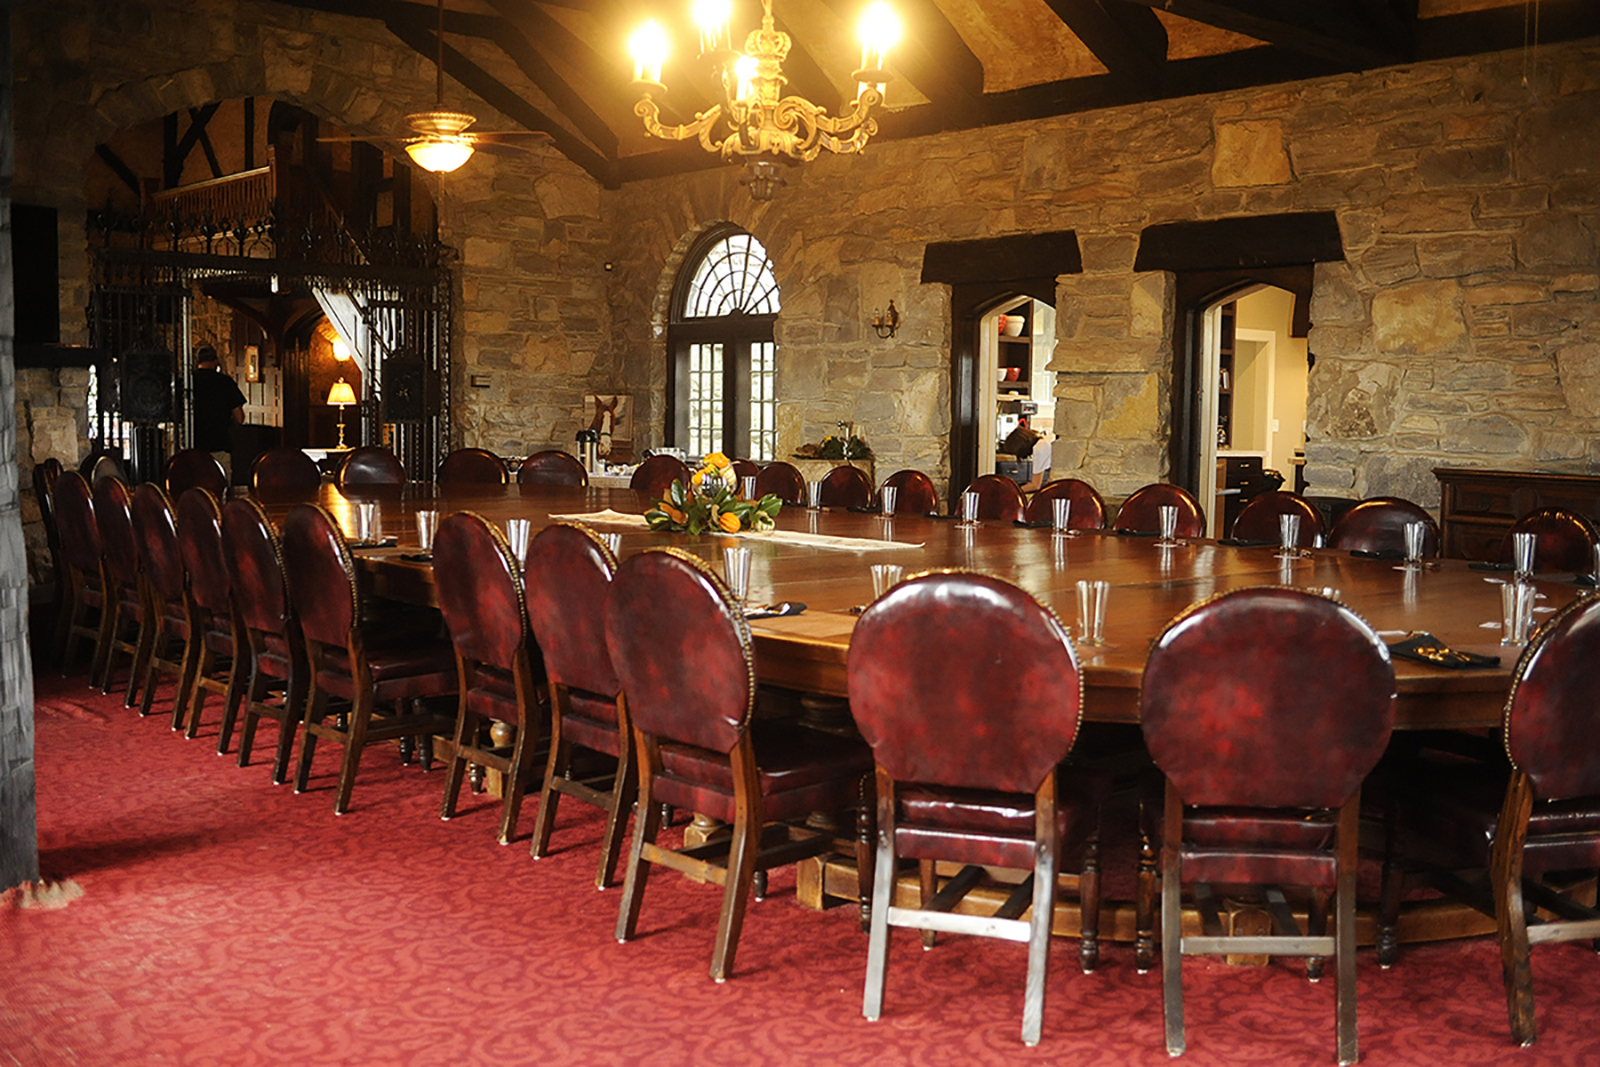 40-person table in the massive dining room inside the manor house of the Milky Way Farm.